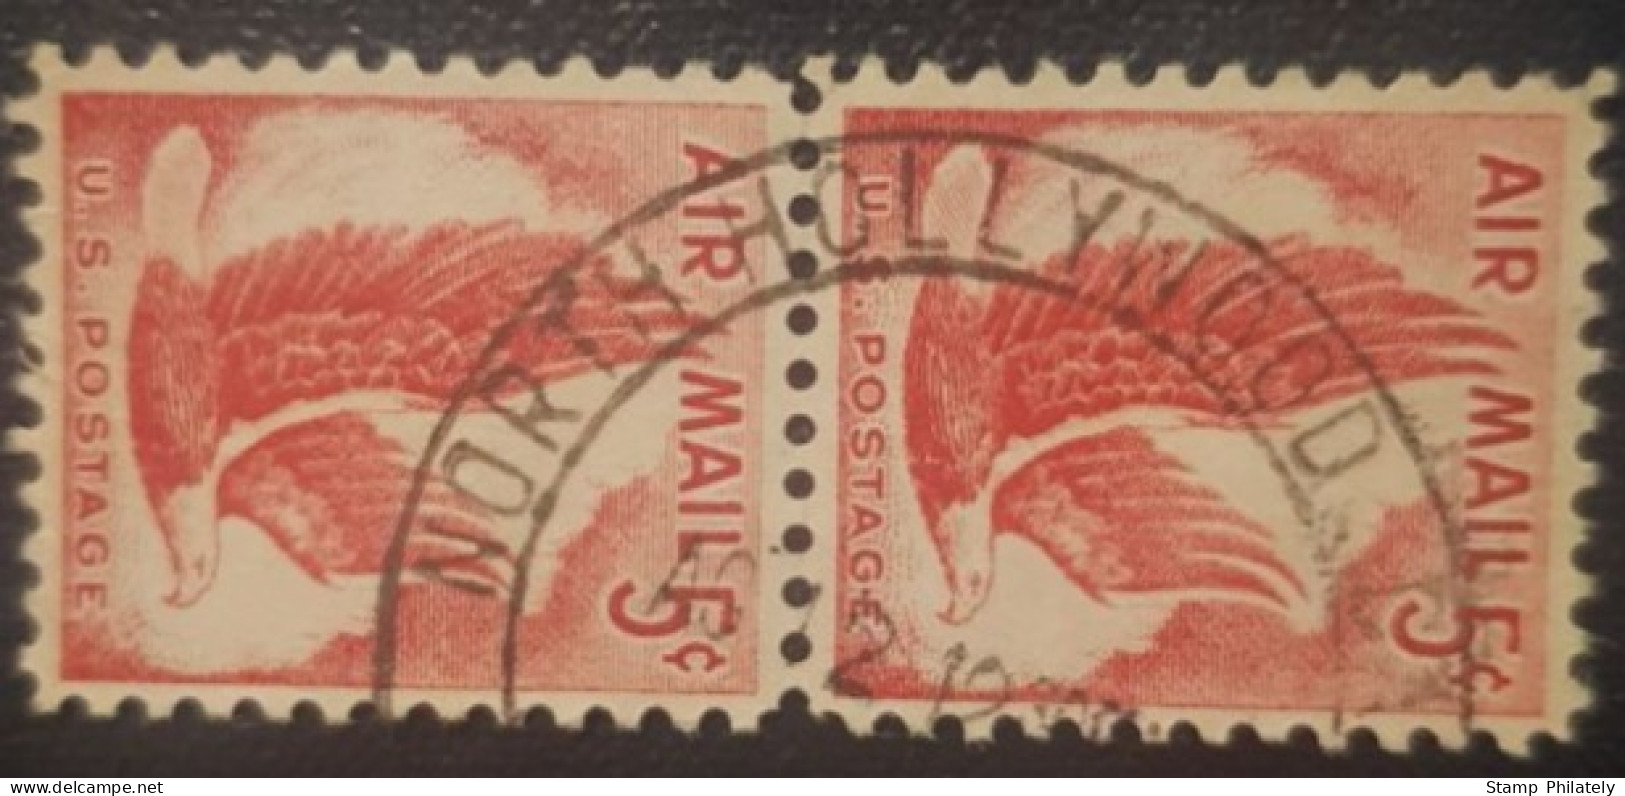 United States 5C Pair Used Postmark Stamp North Hollywood Cancel - 2a. 1941-1960 Gebraucht